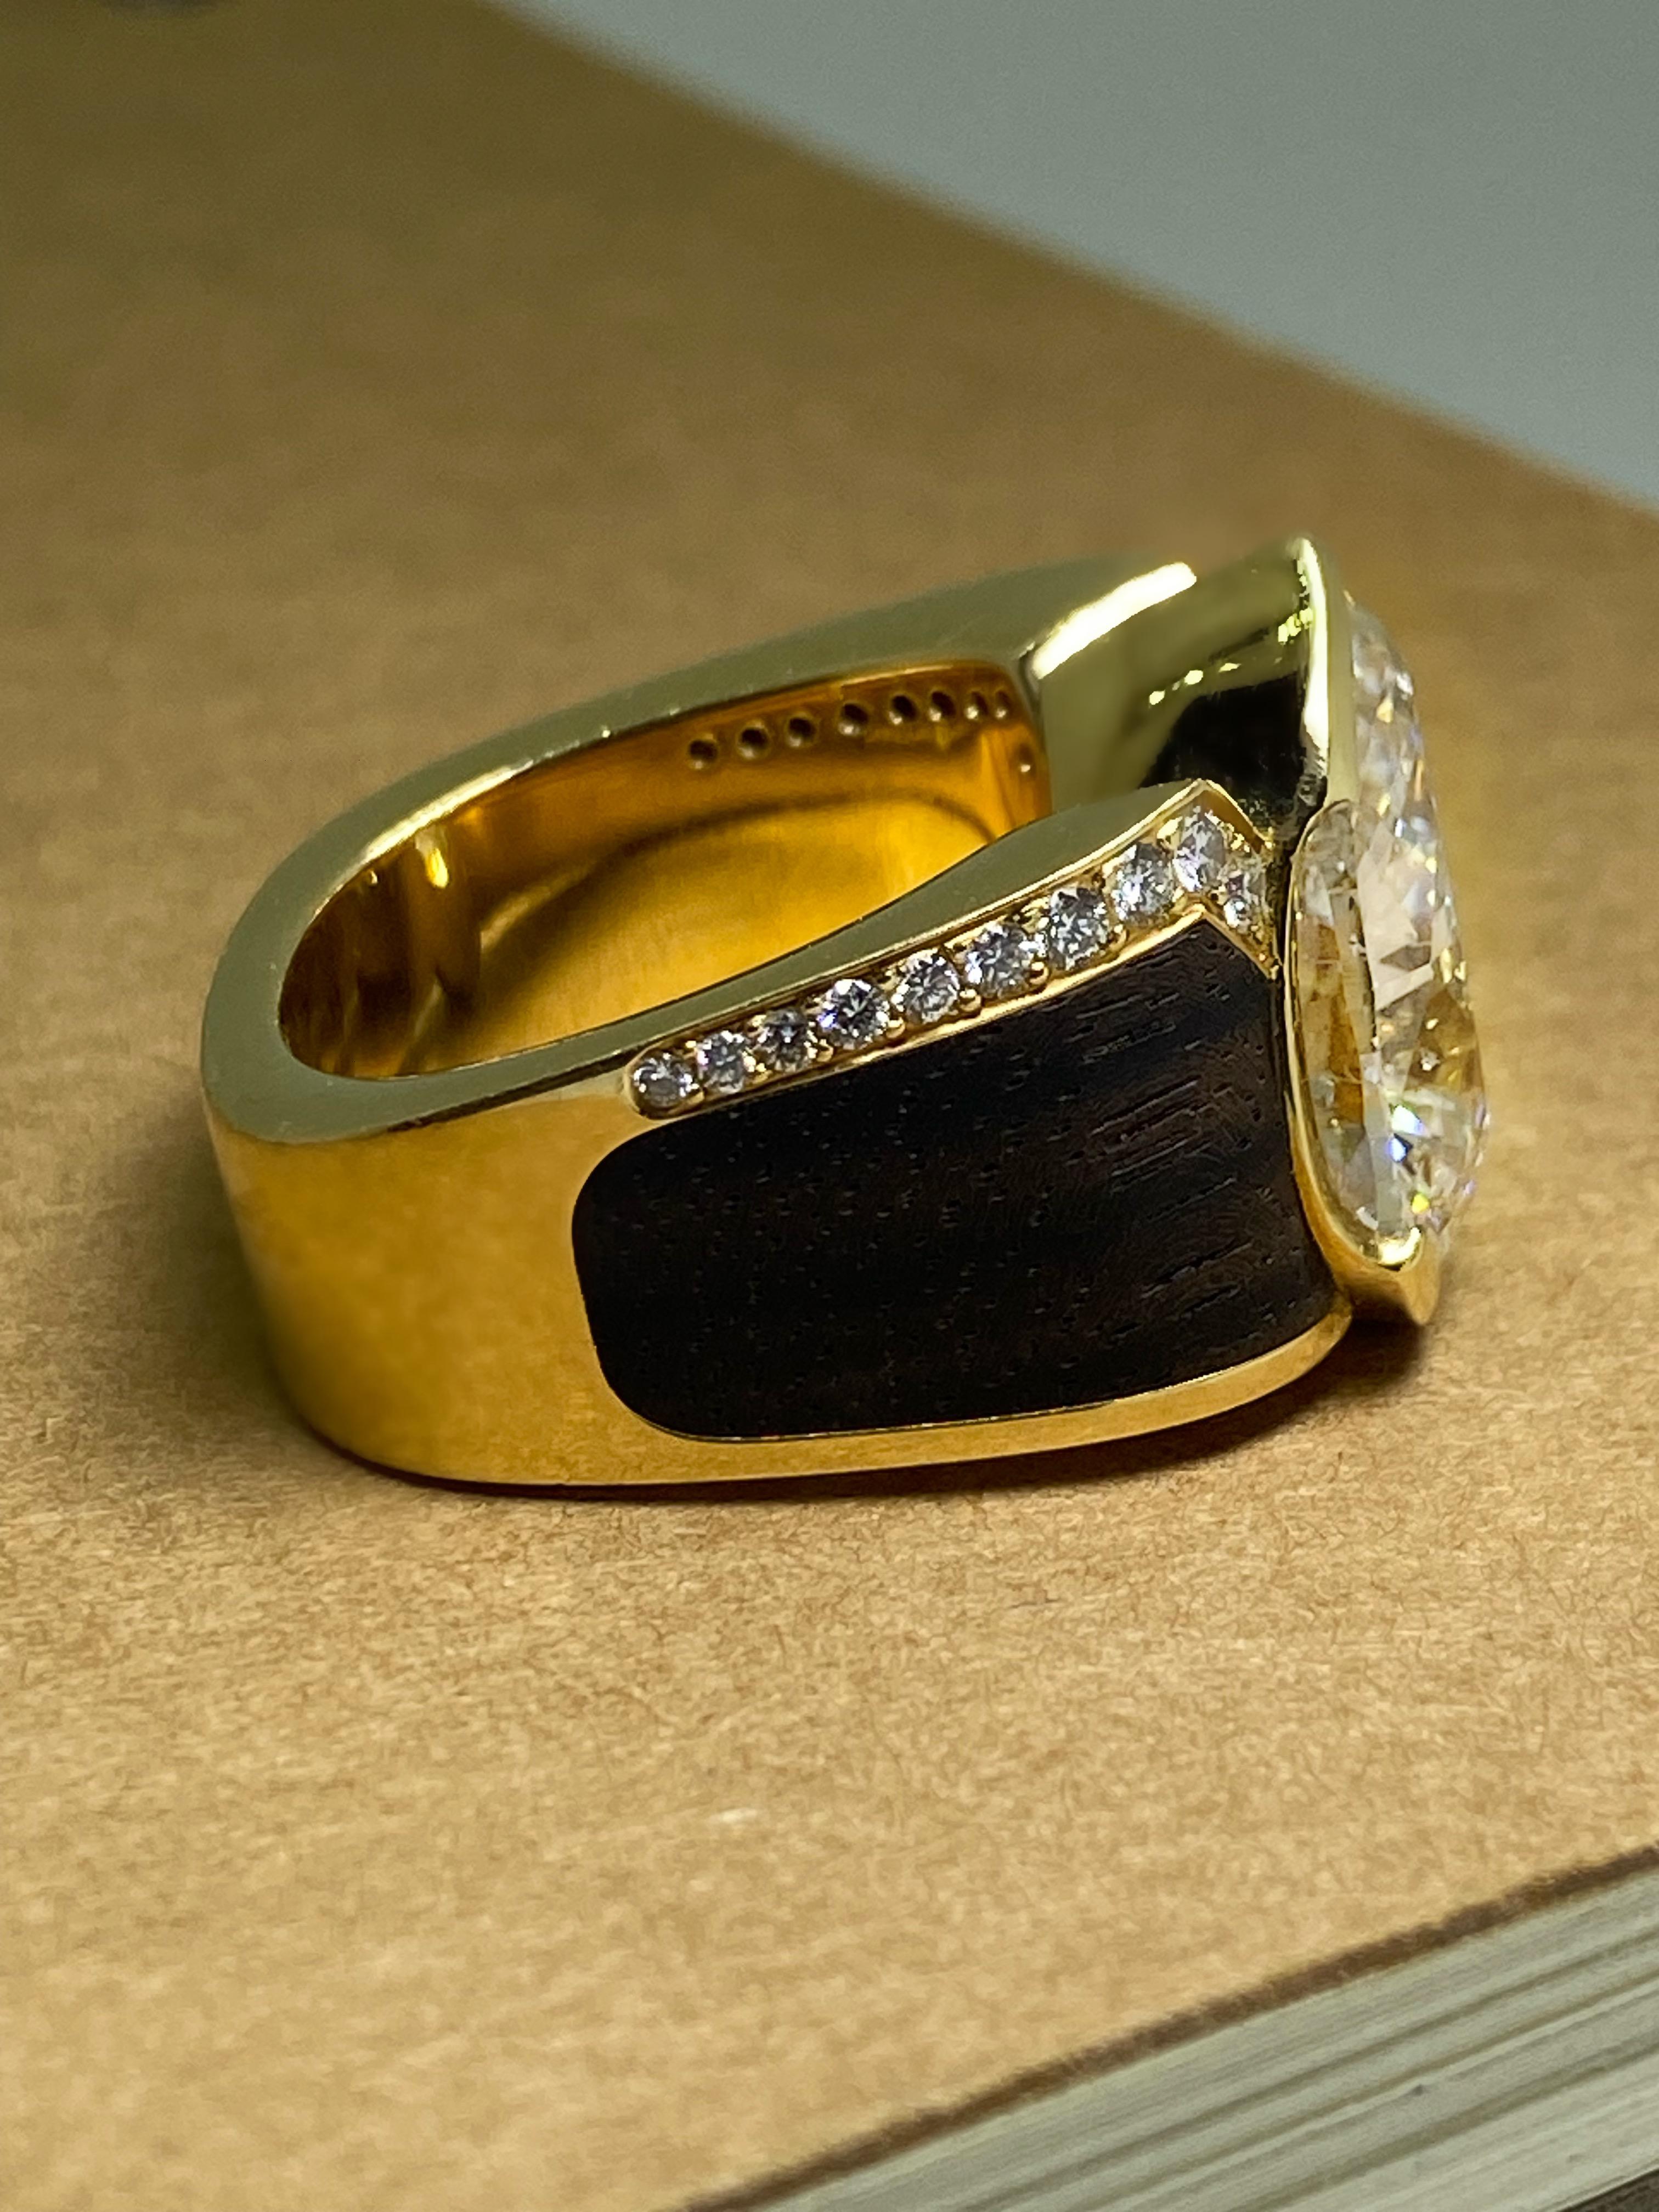 Women's Natural 12.00ct Pear Shaped/Cut Diamond Ring in 18K Yellow Gold, valued at 490K